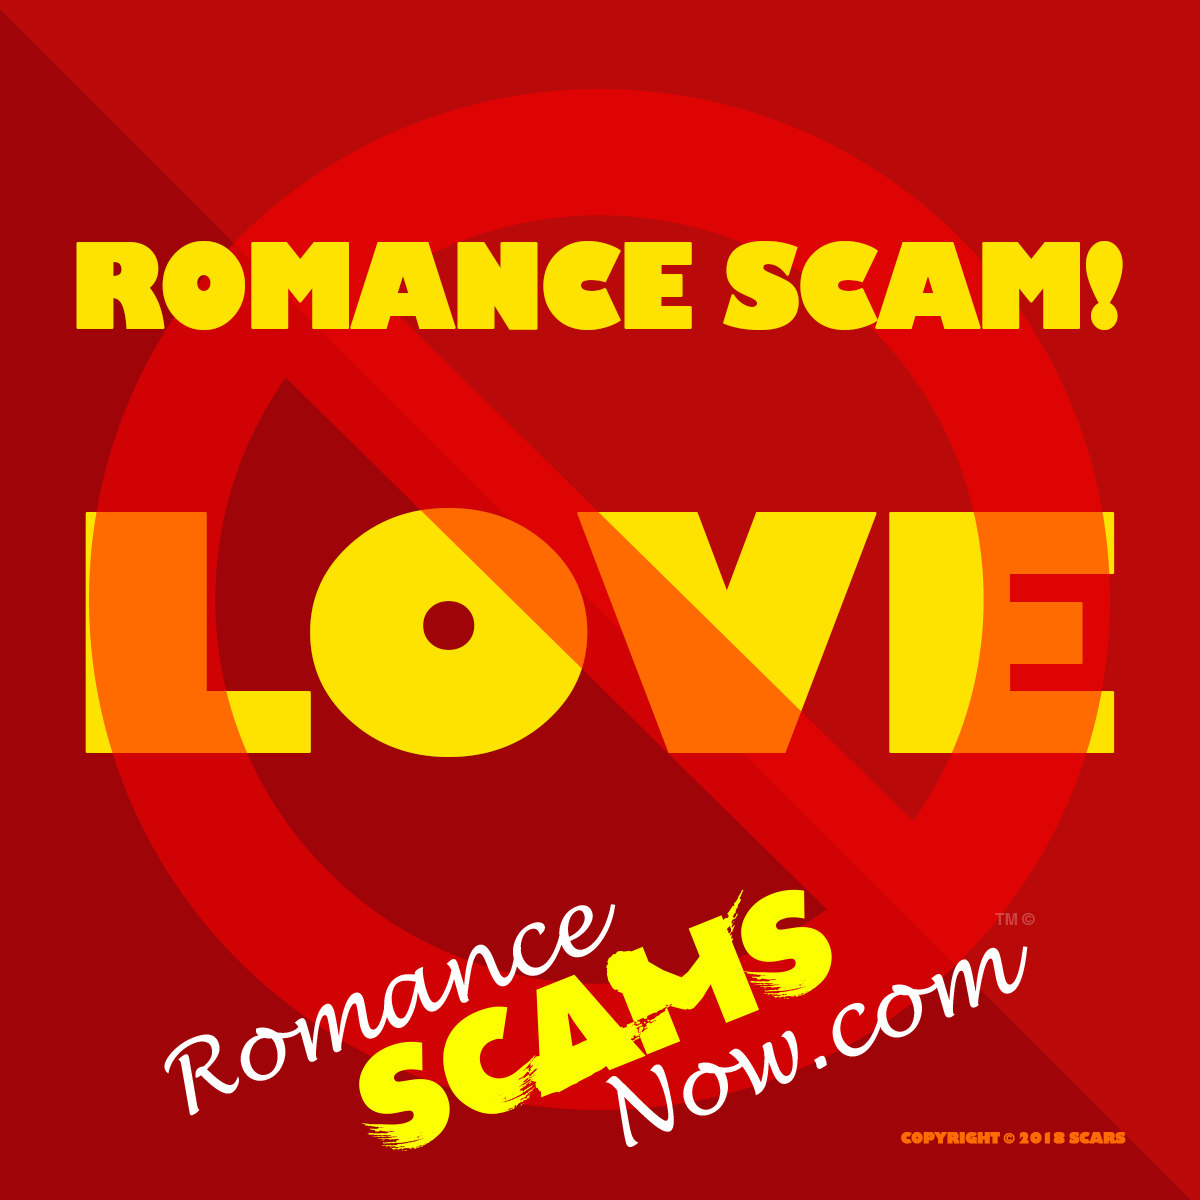 SCARS ™ / RSN™ Anti-Scam Poster 62